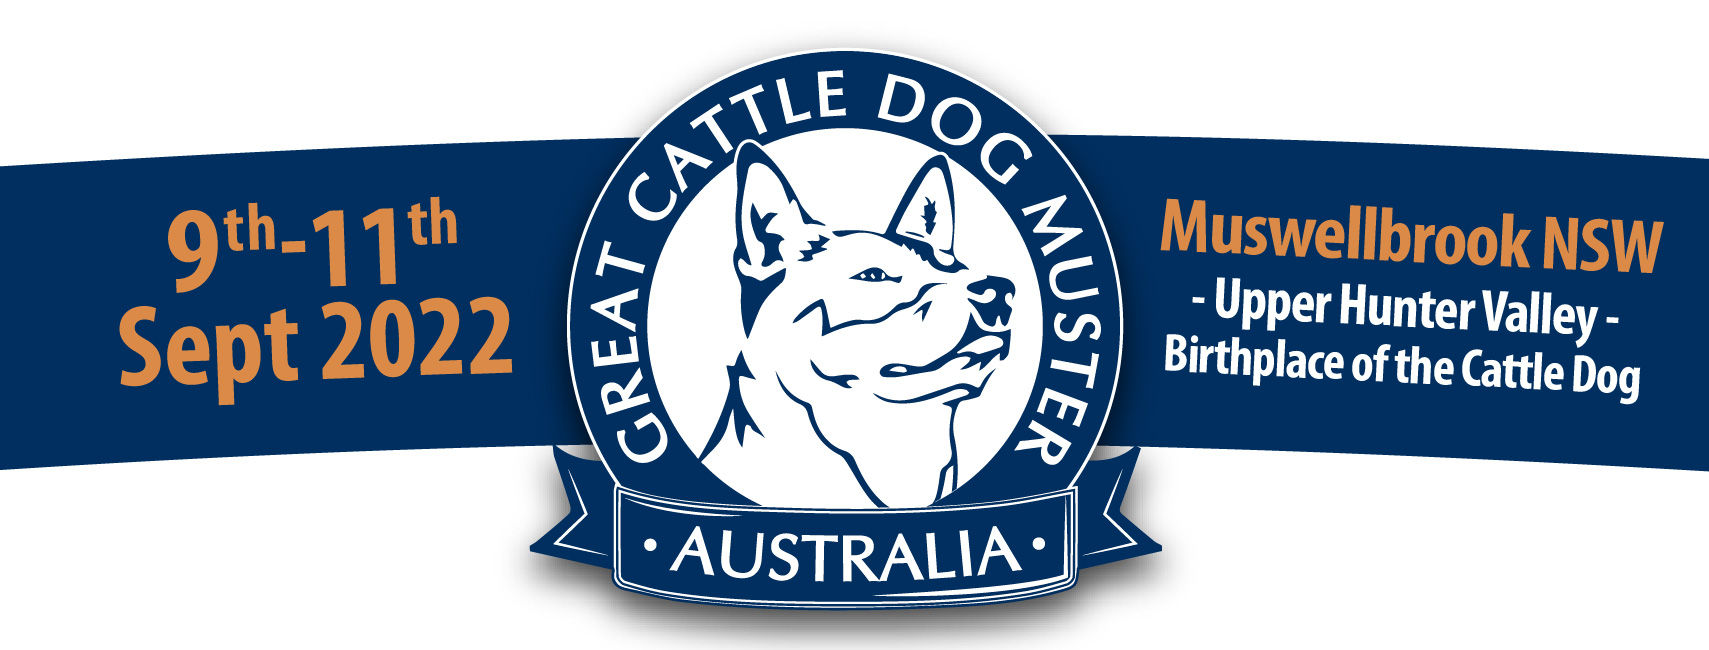 New Dates Announced For Great Cattle Dog Muster Muswellbrook